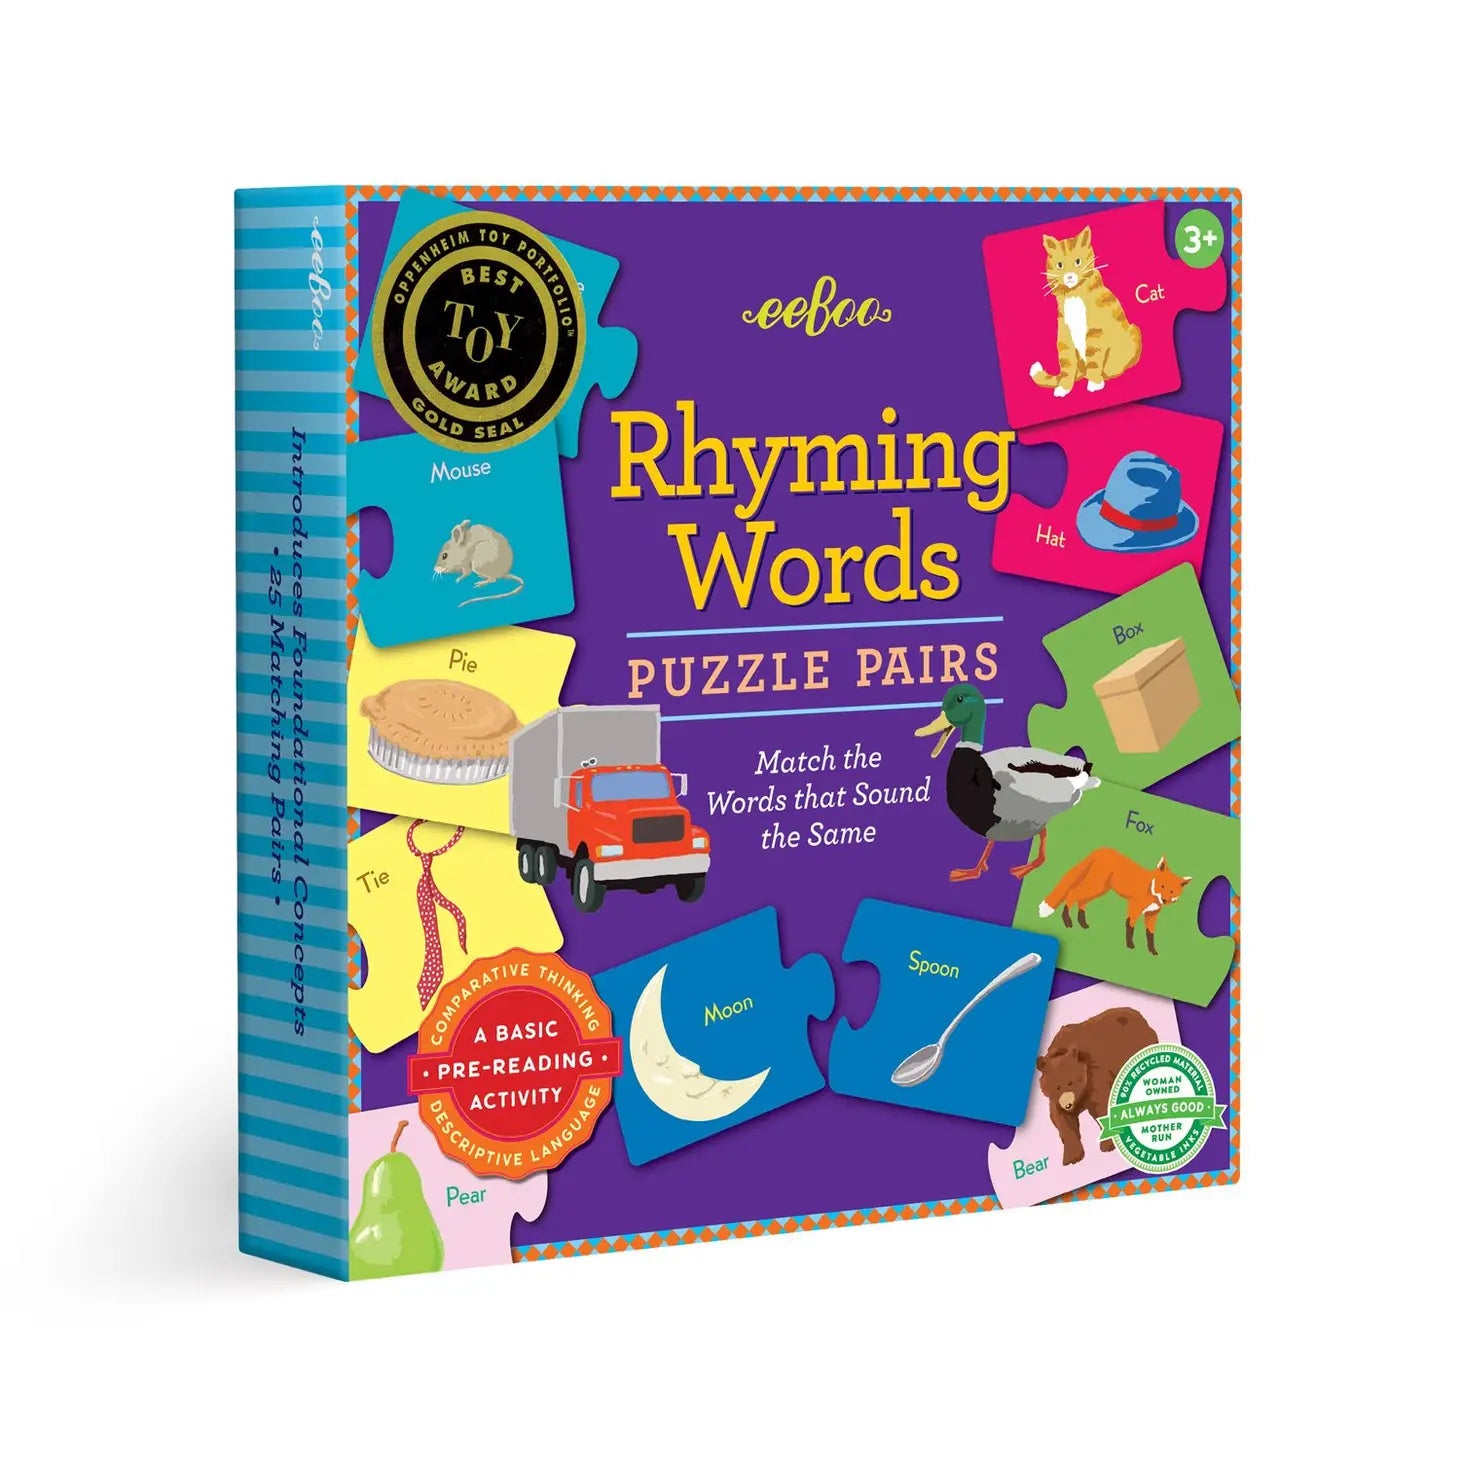 Rhyming Puzzle Pairs Game